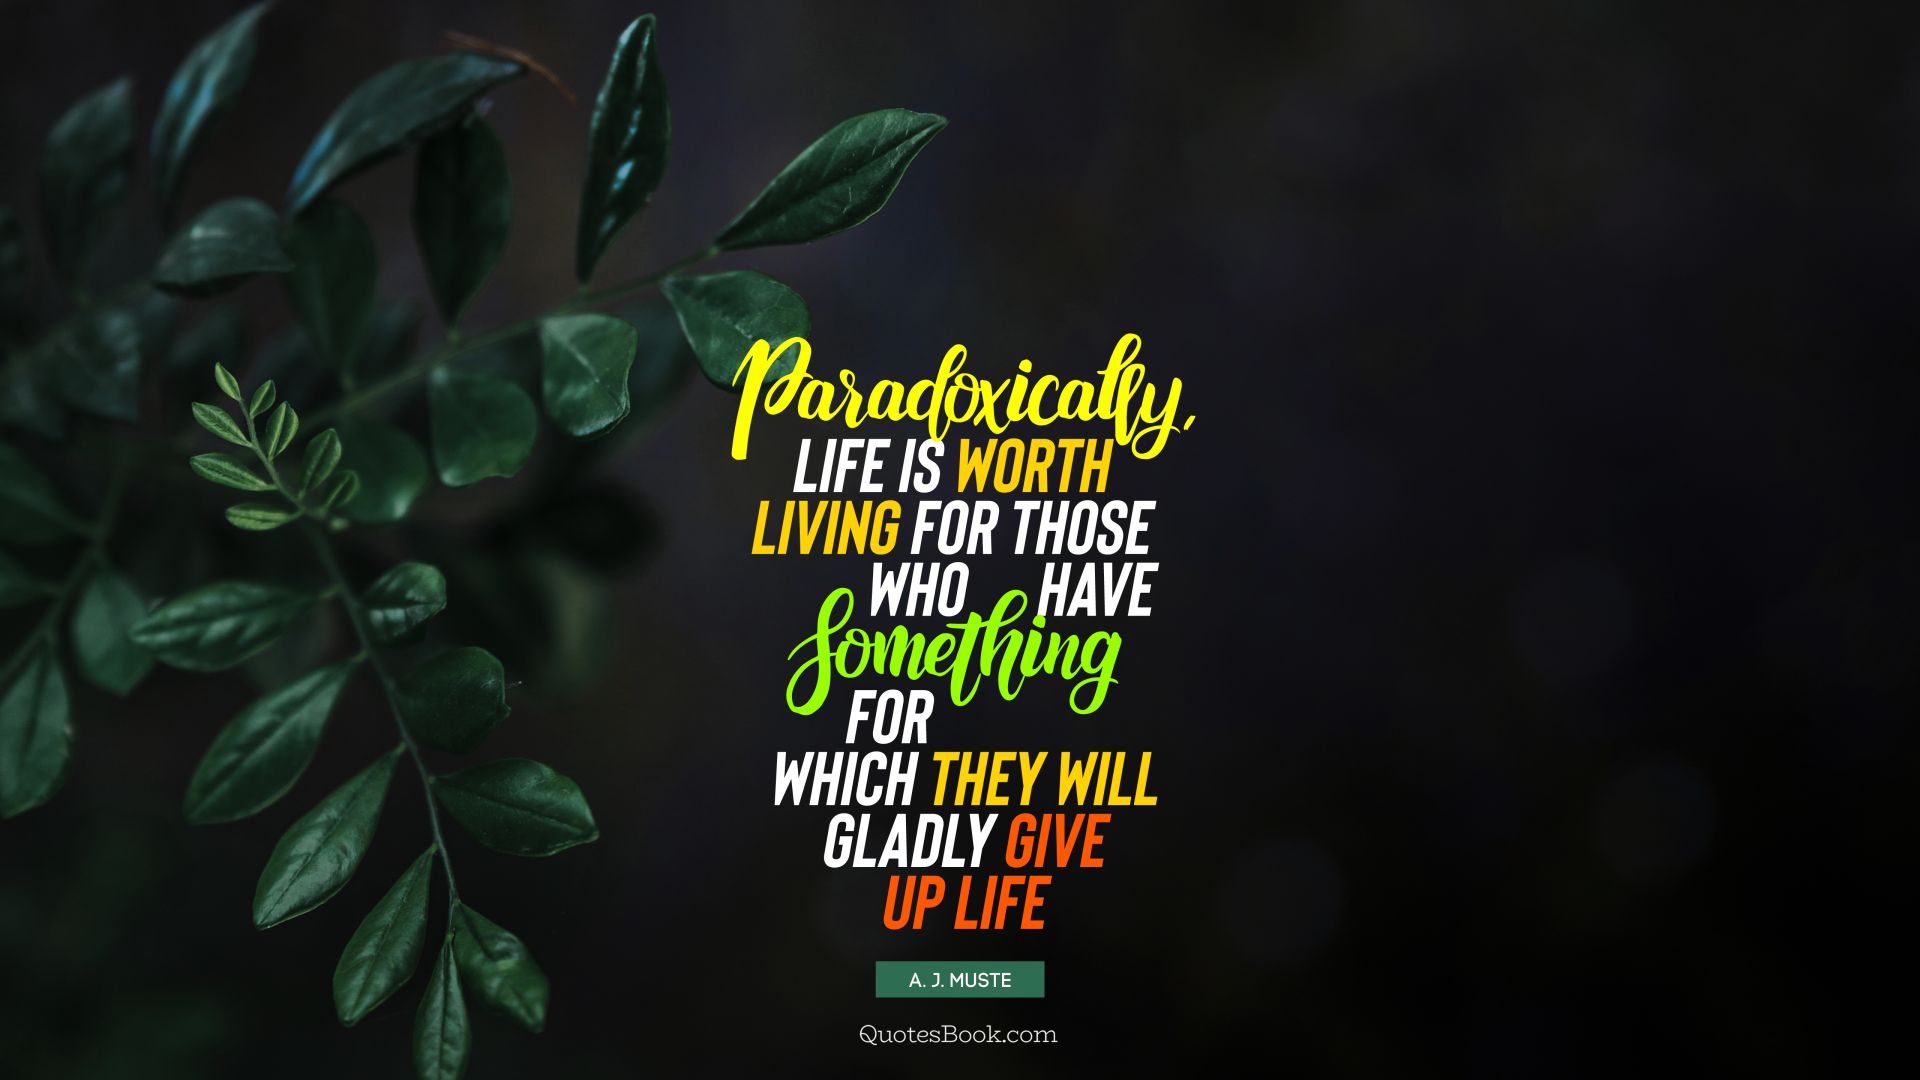 Paradoxically, life is worth living for those who have something for which they will gladly give up life. - Quote by A. J. Muste